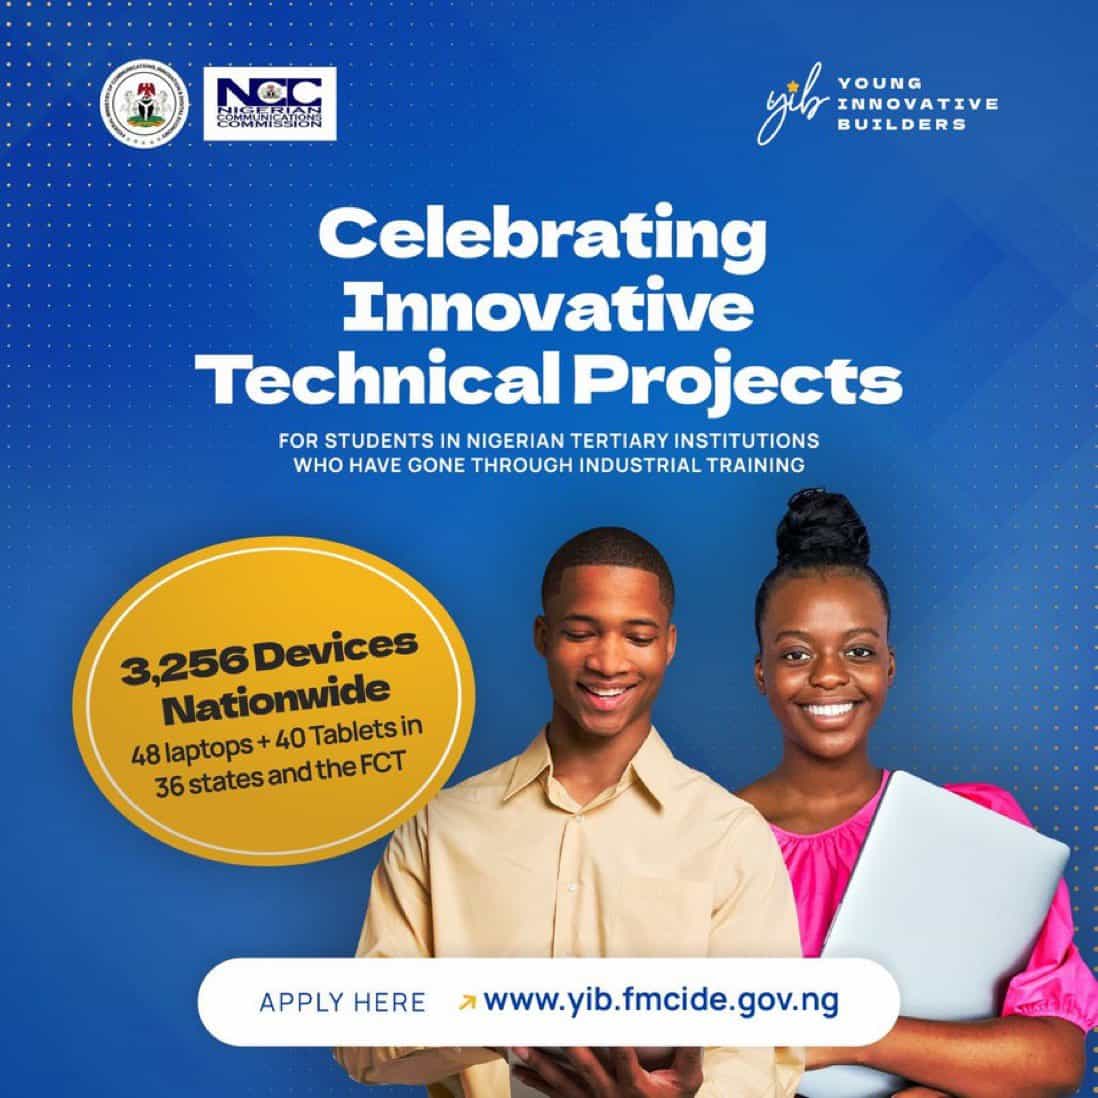 Nigeria's Young Innovative Builders (YIB) Programme